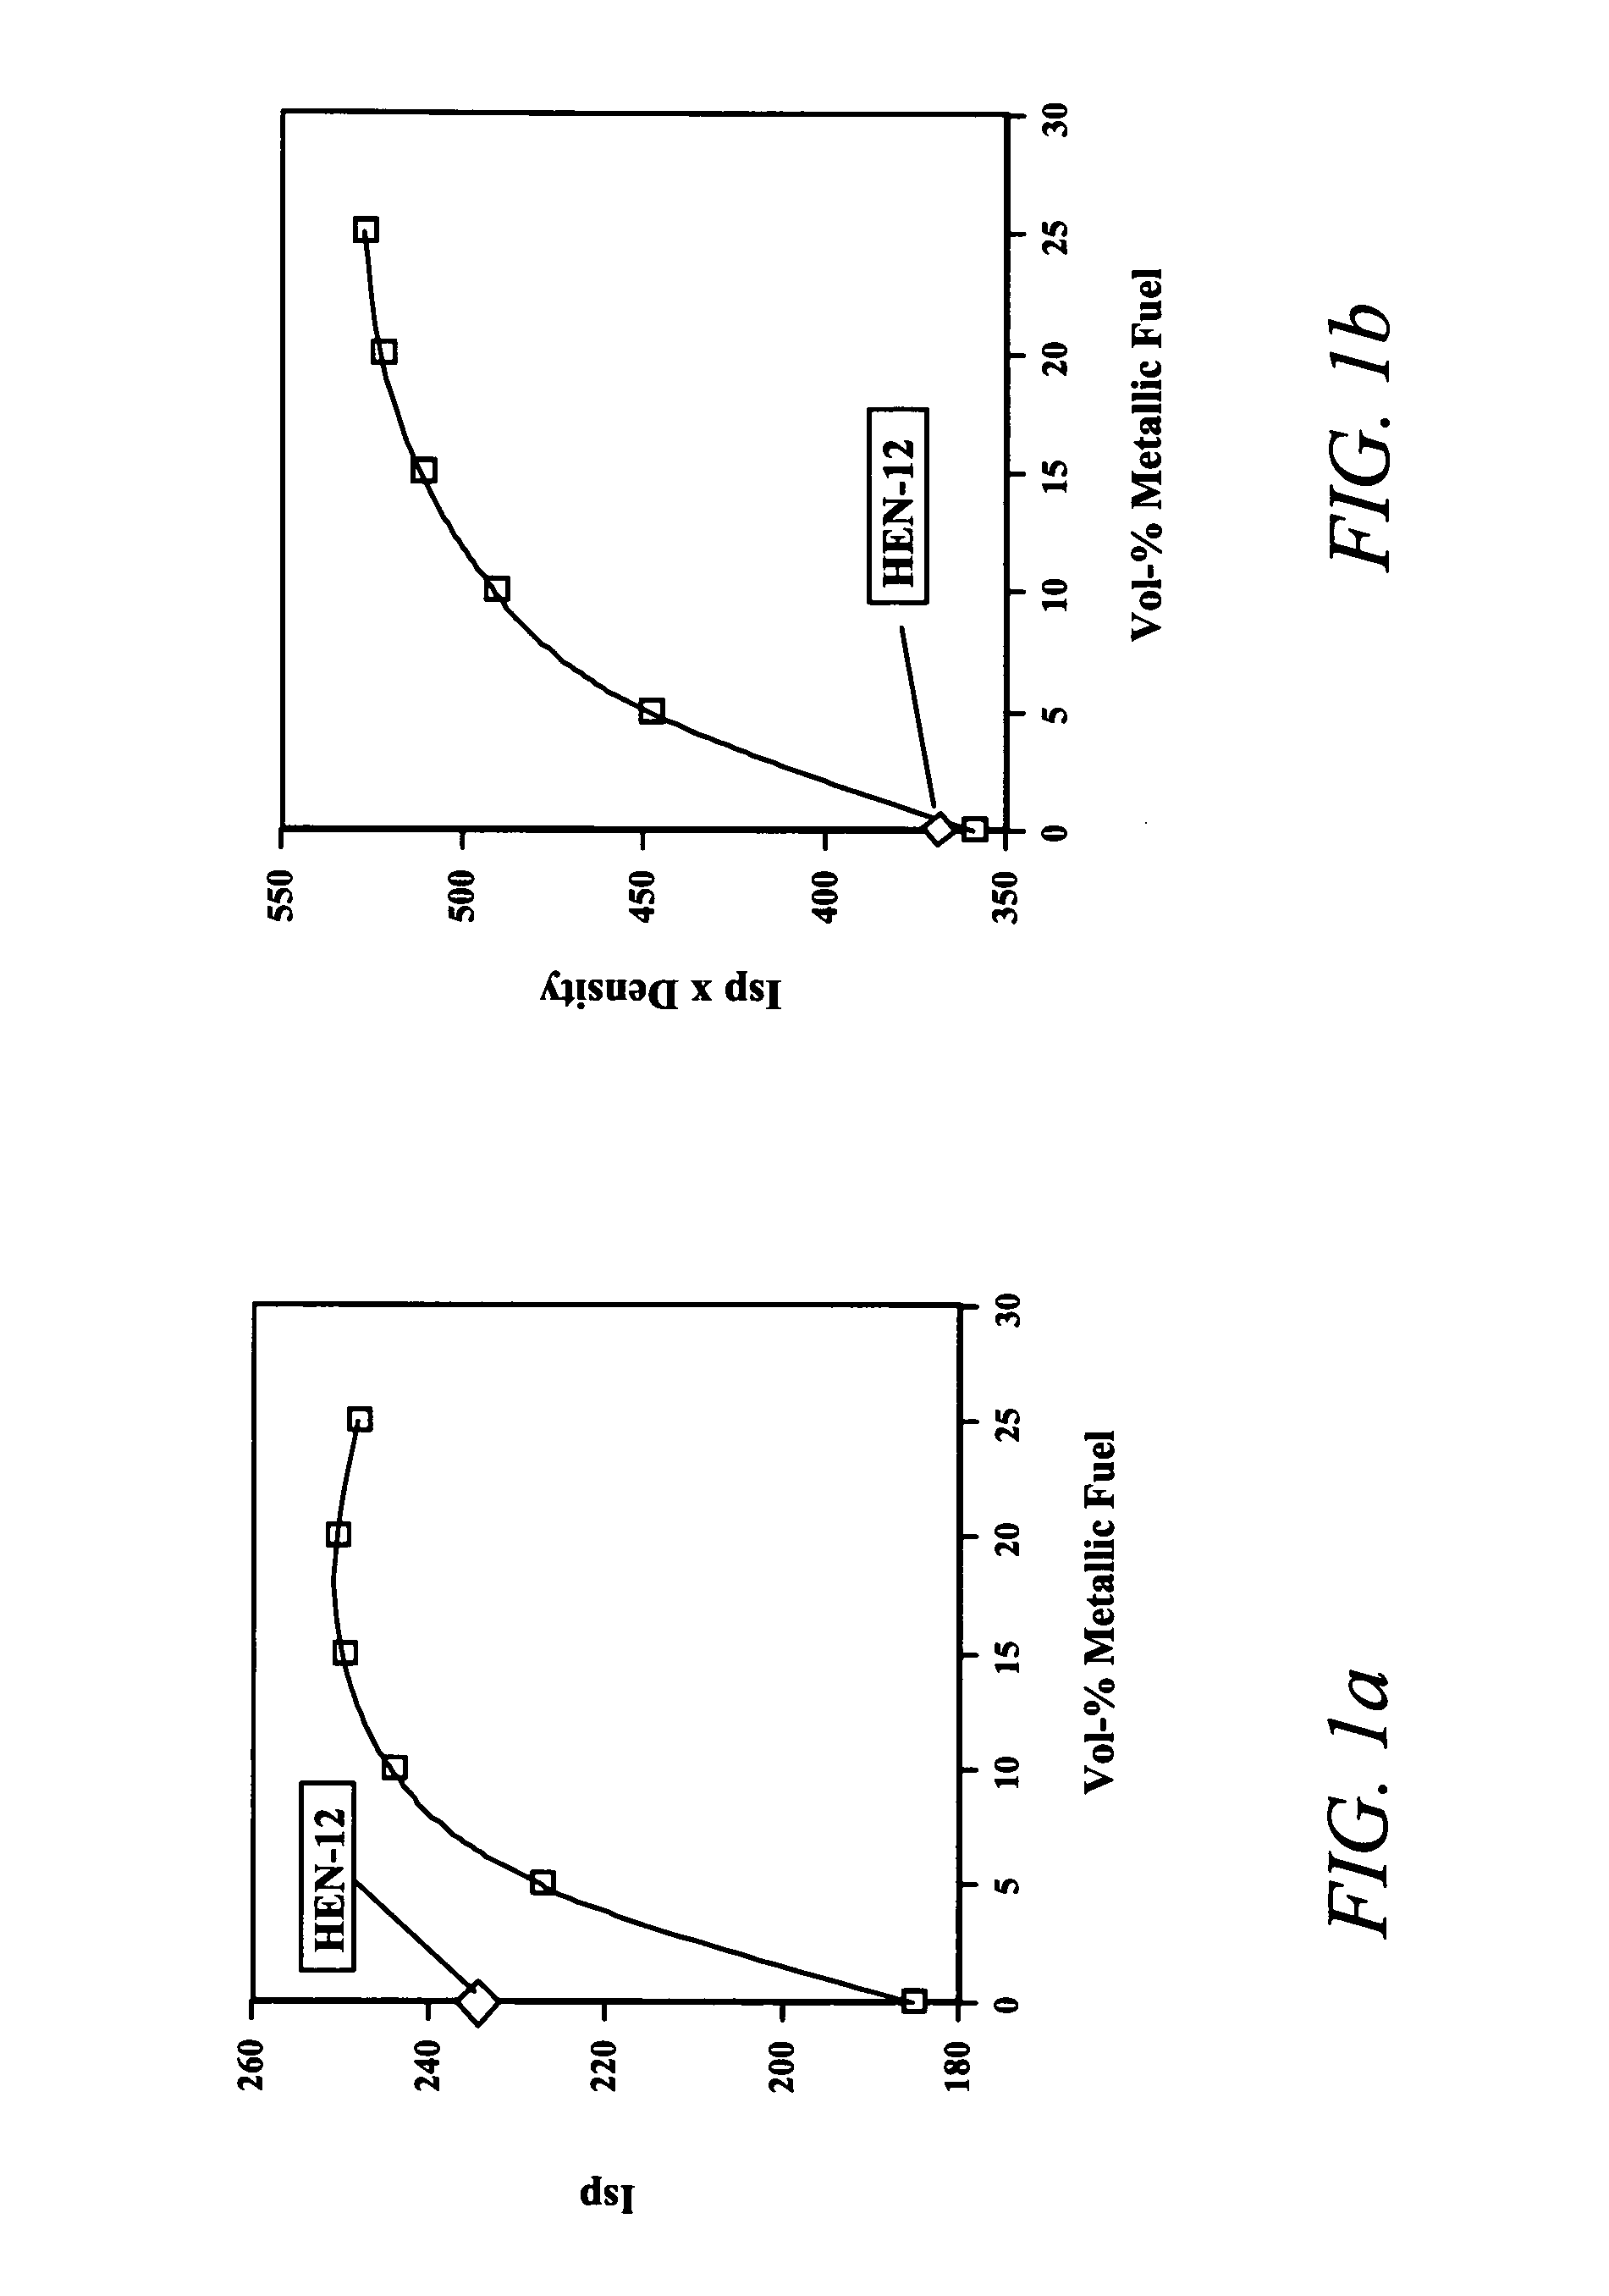 Higher-performance solid-rocket propellants and methods of utilizing them